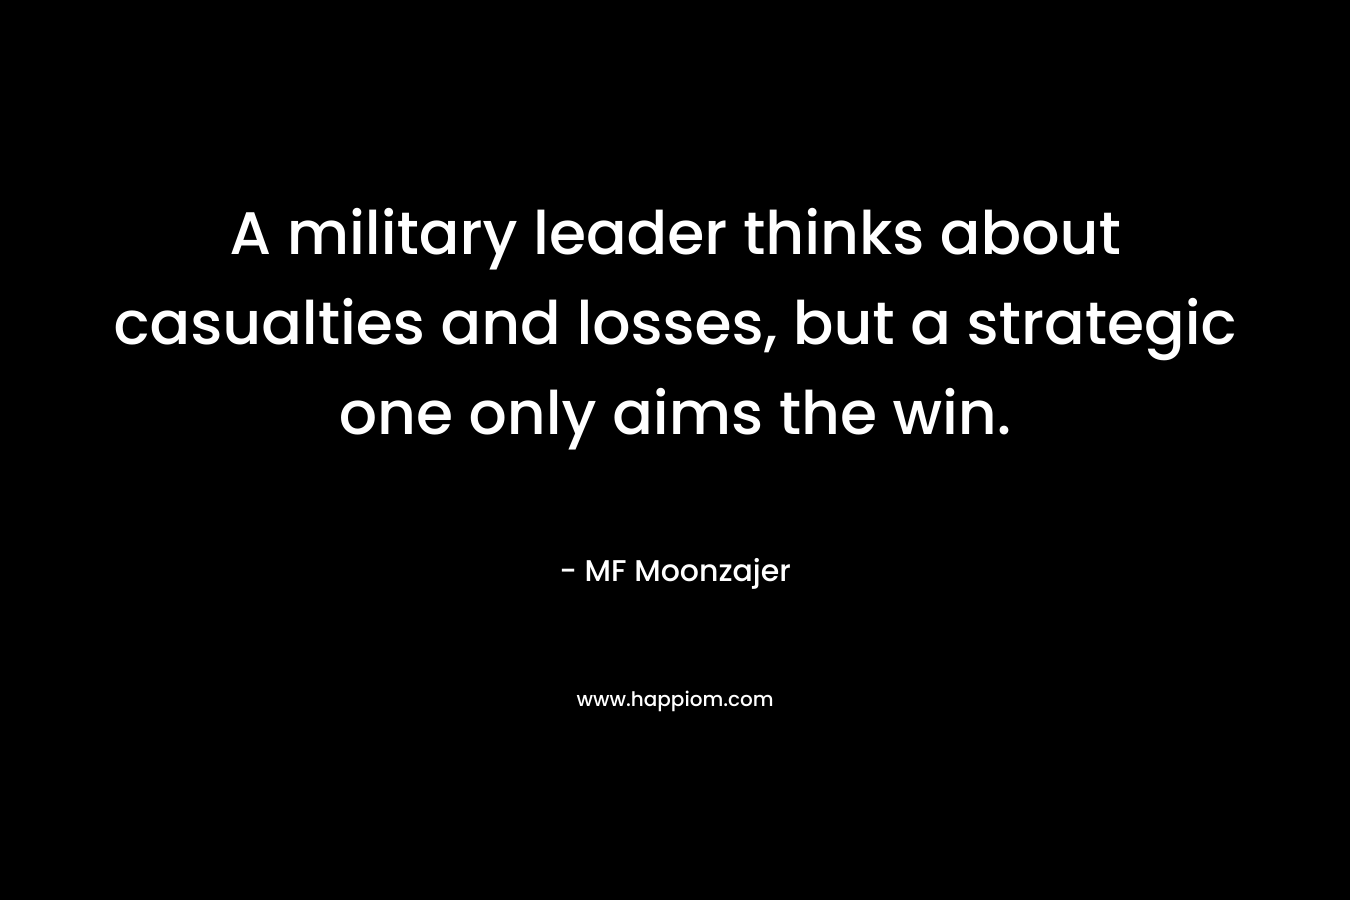 A military leader thinks about casualties and losses, but a strategic one only aims the win.